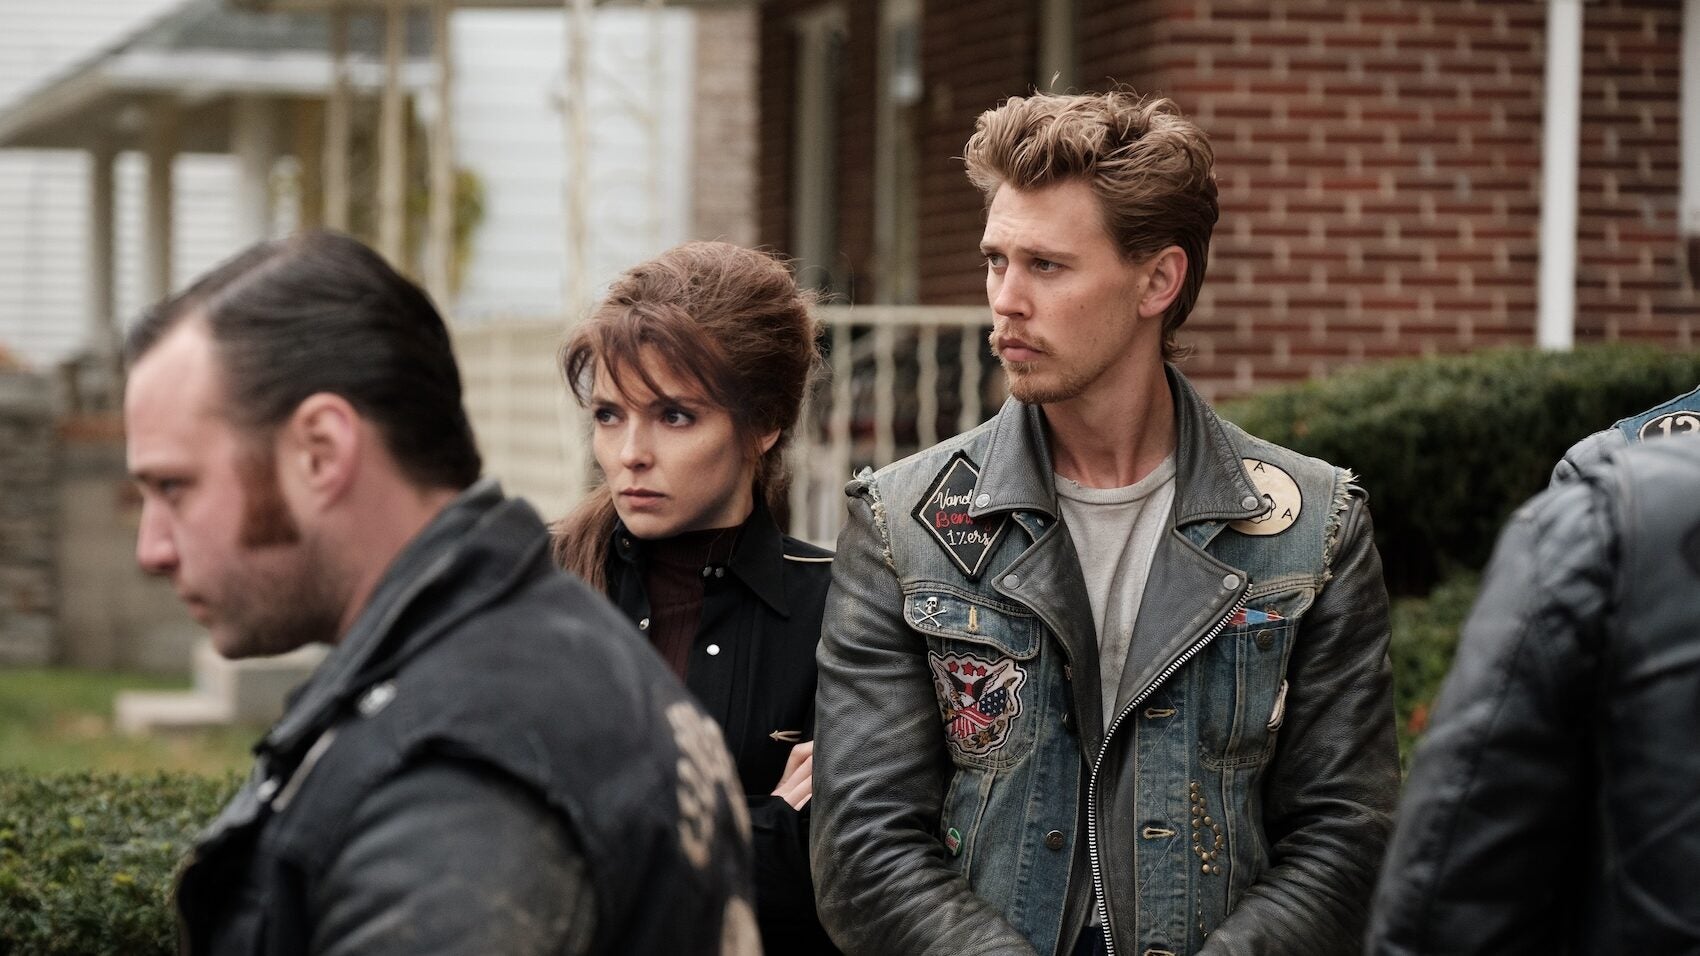 Emory Cohen as Cockroach,  Jodie Comer as Kathy and Austin Butler as Benny in director Jeff Nichols' "The Bikeriders."